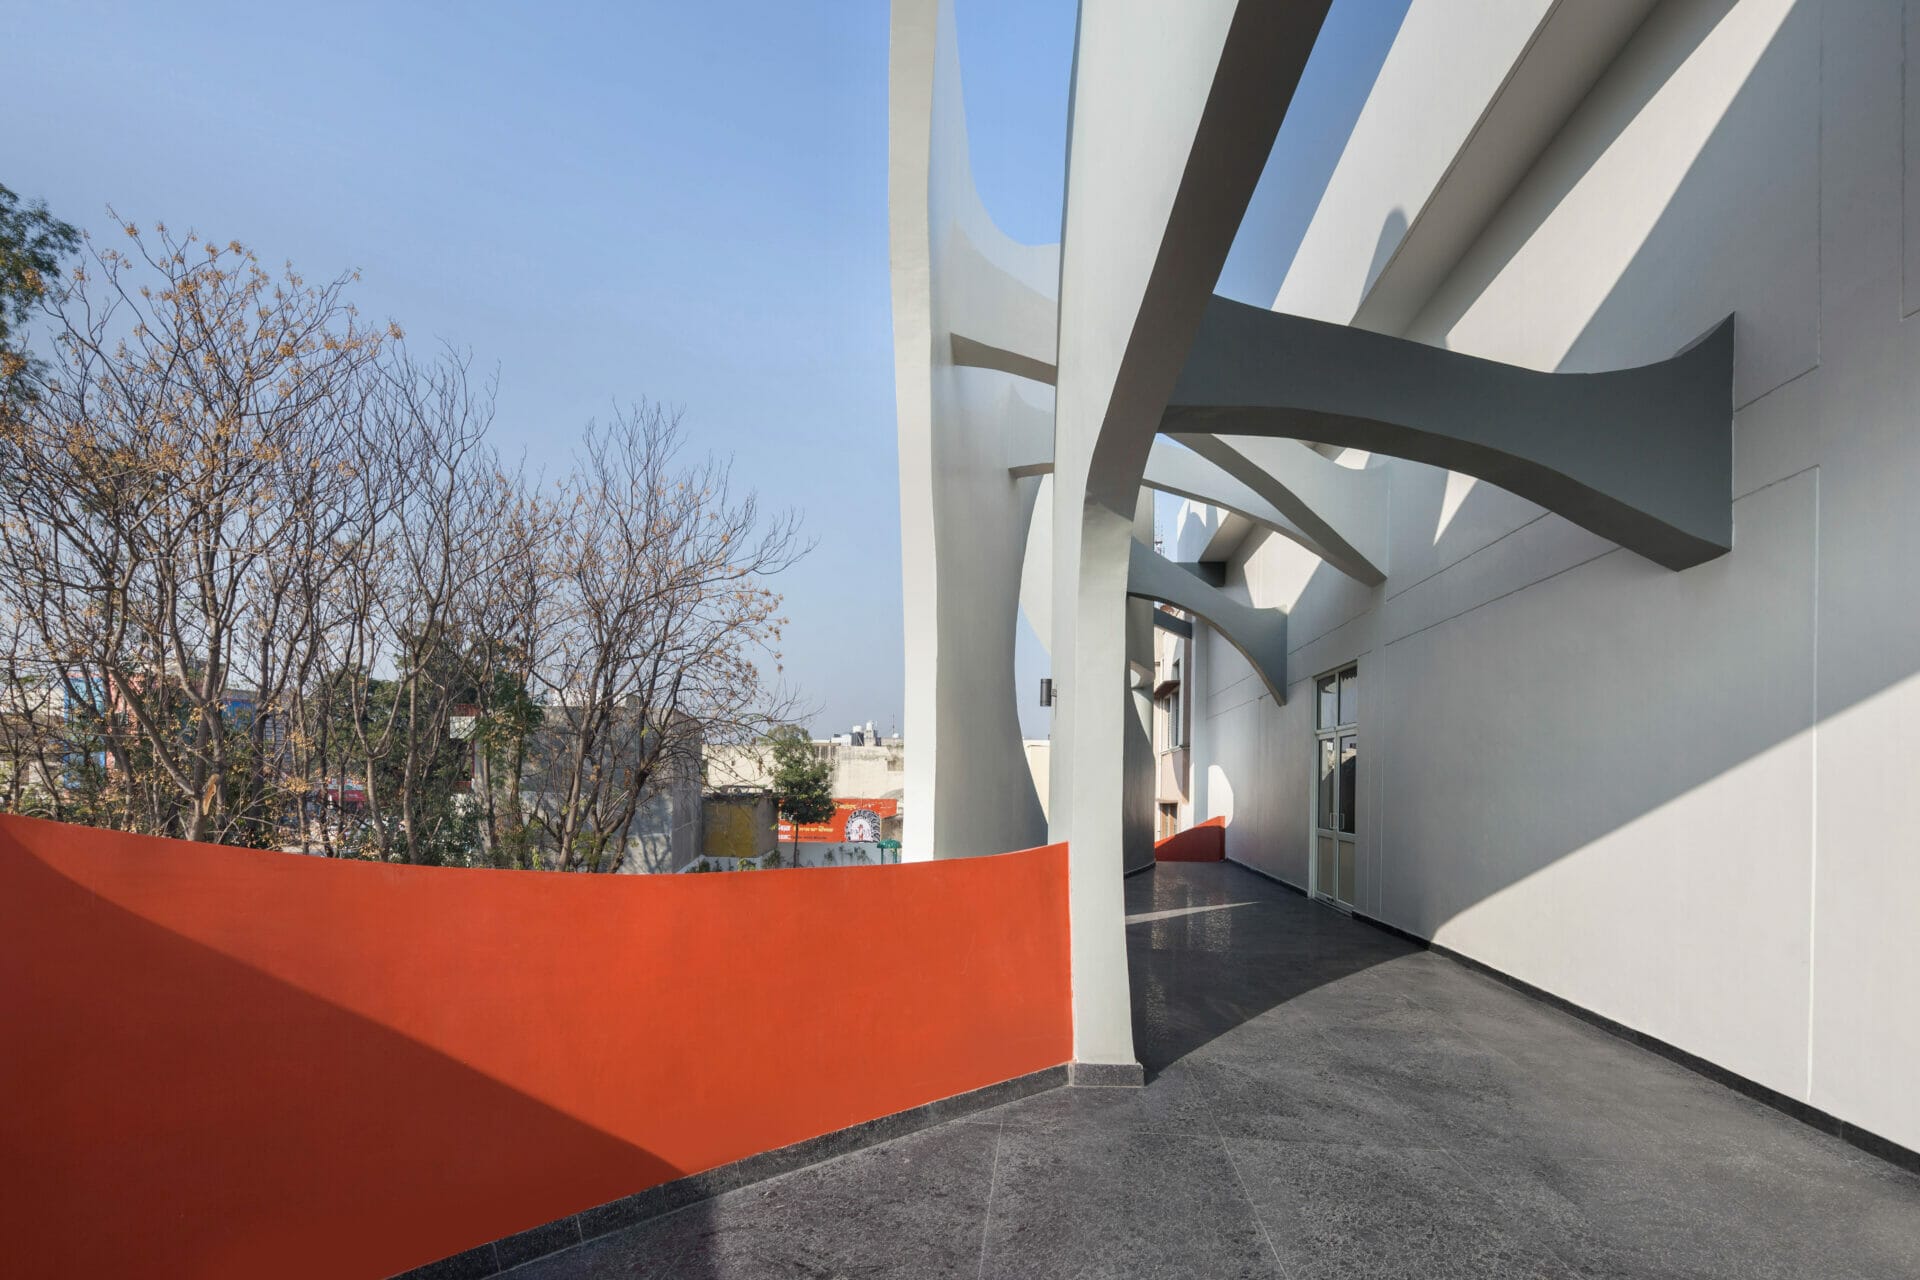 Studio Ardete elucidates their acclaimed project The Doaba Public School